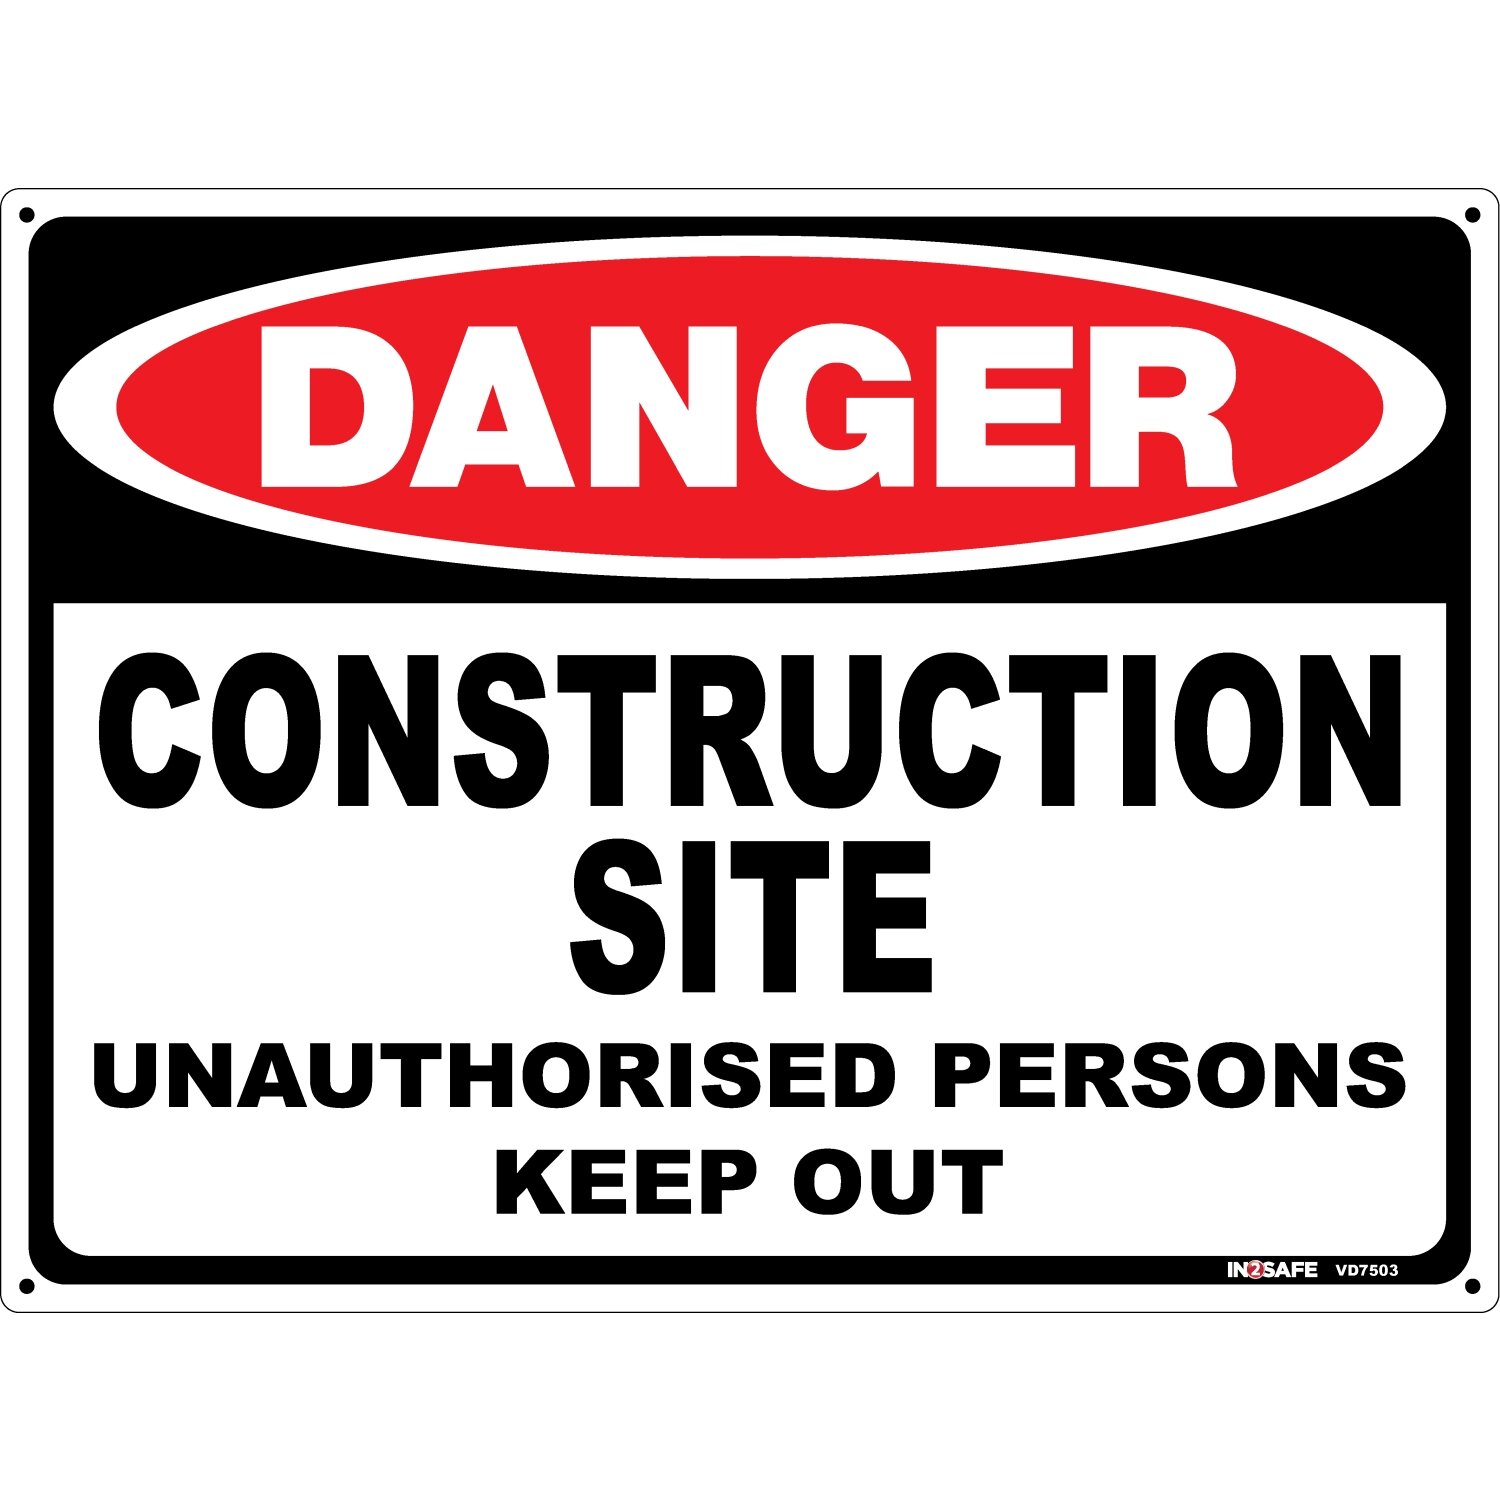 DANGER Construction Site Unauthorised Persons Keep Out - Cleanline Tasman